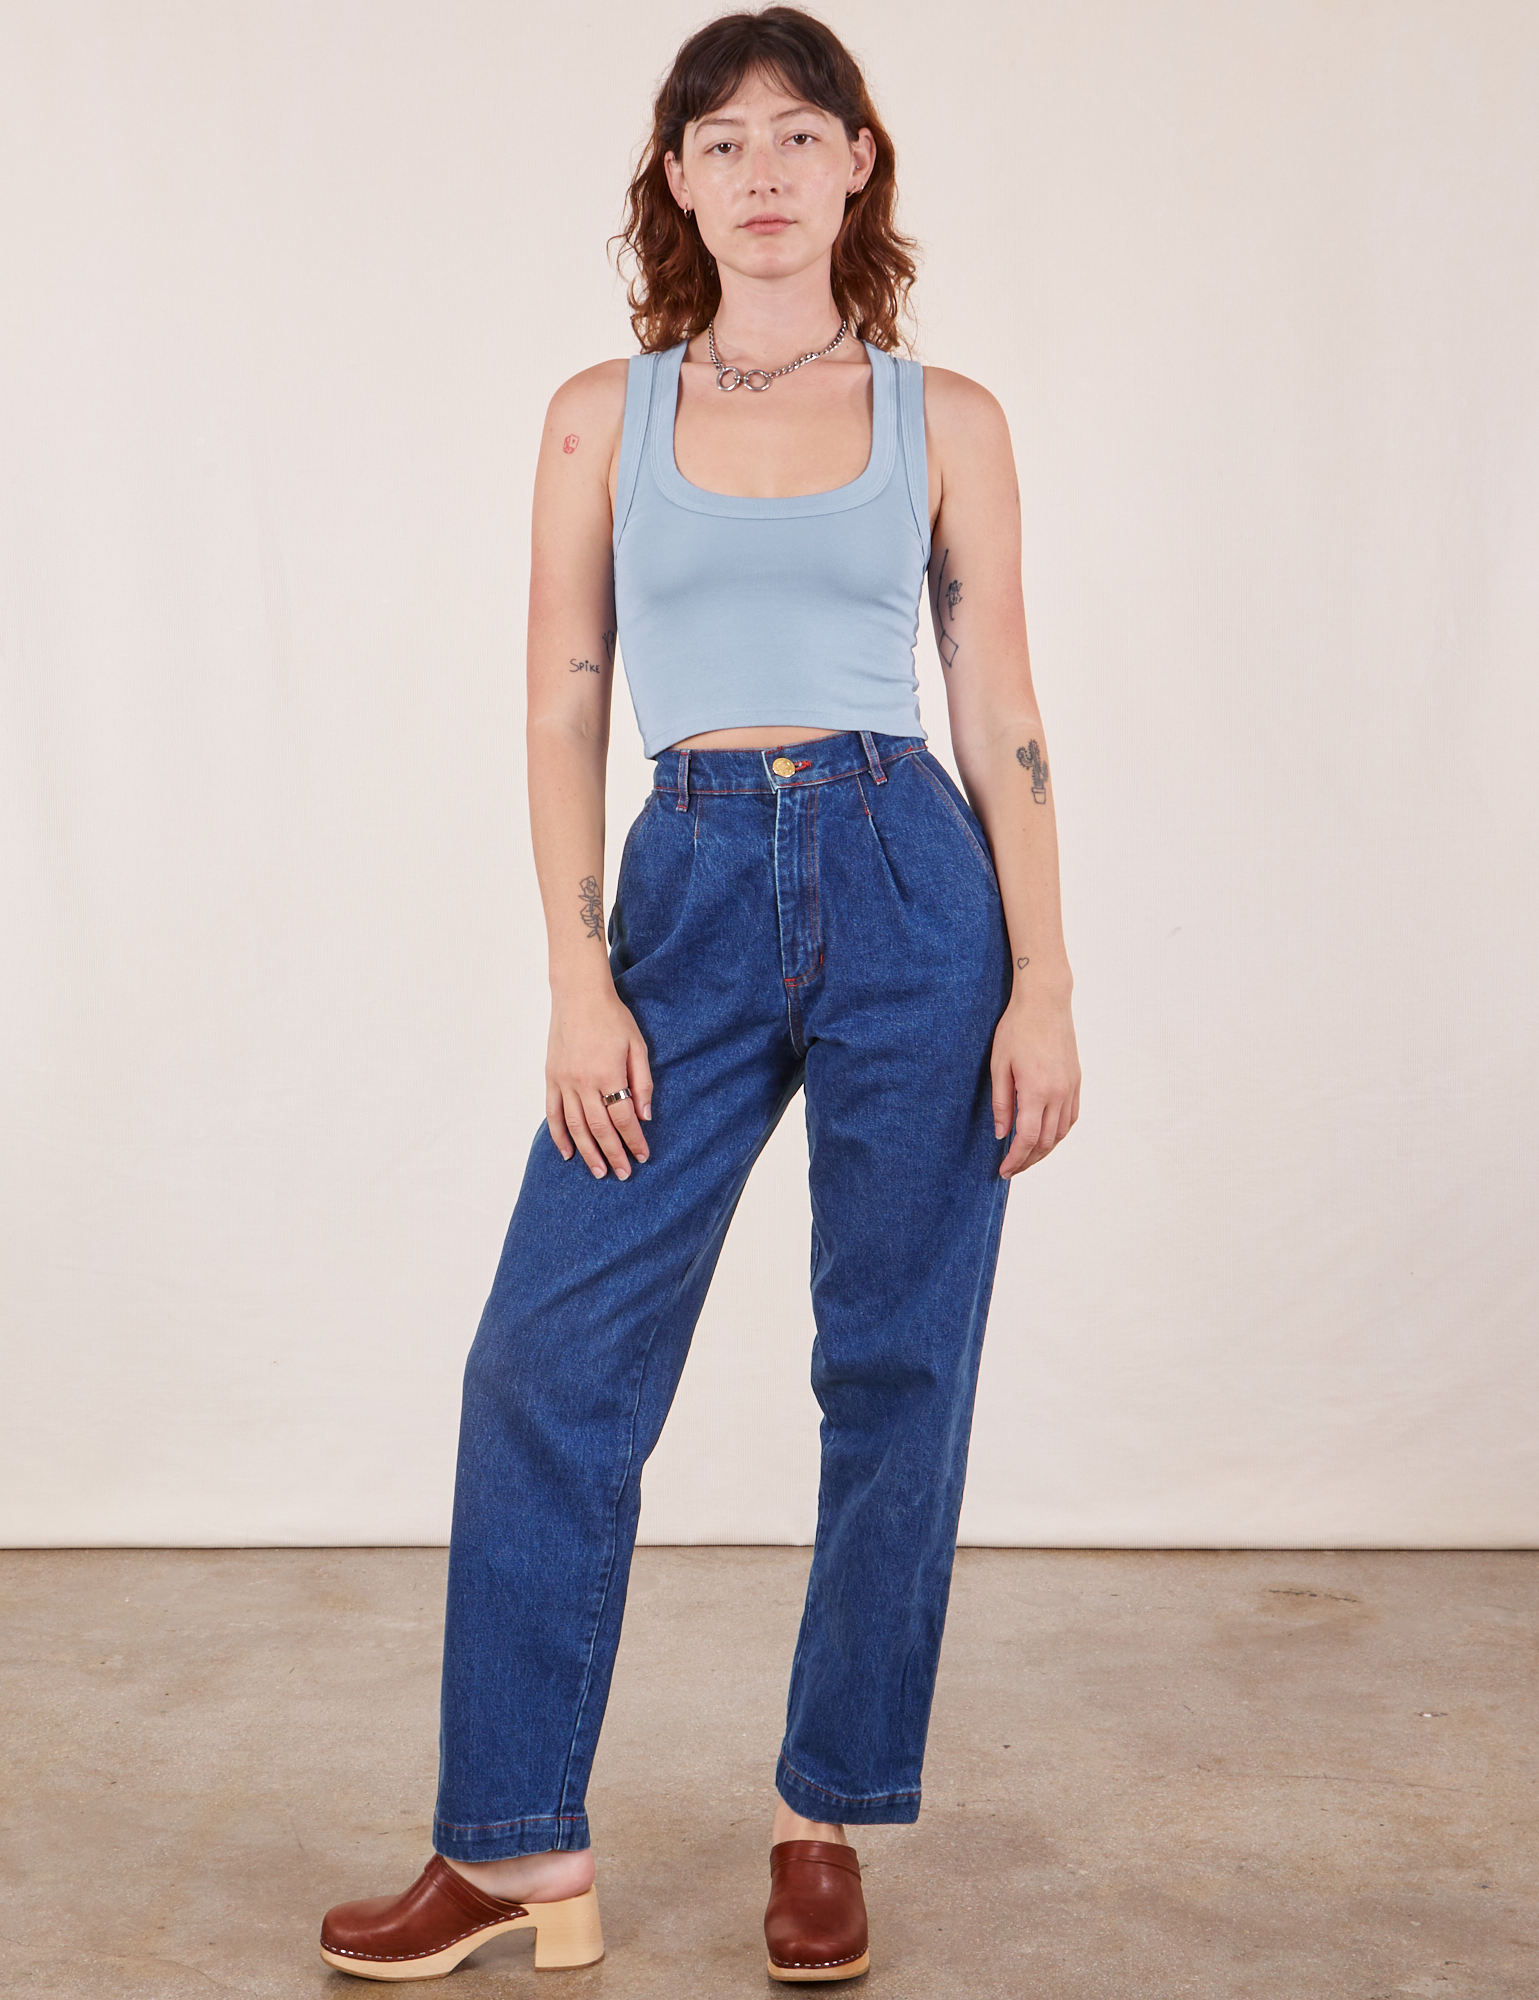 Alex is wearing Cropped Tank Top in Periwinkle and dark wash Denim Trouser Jeans